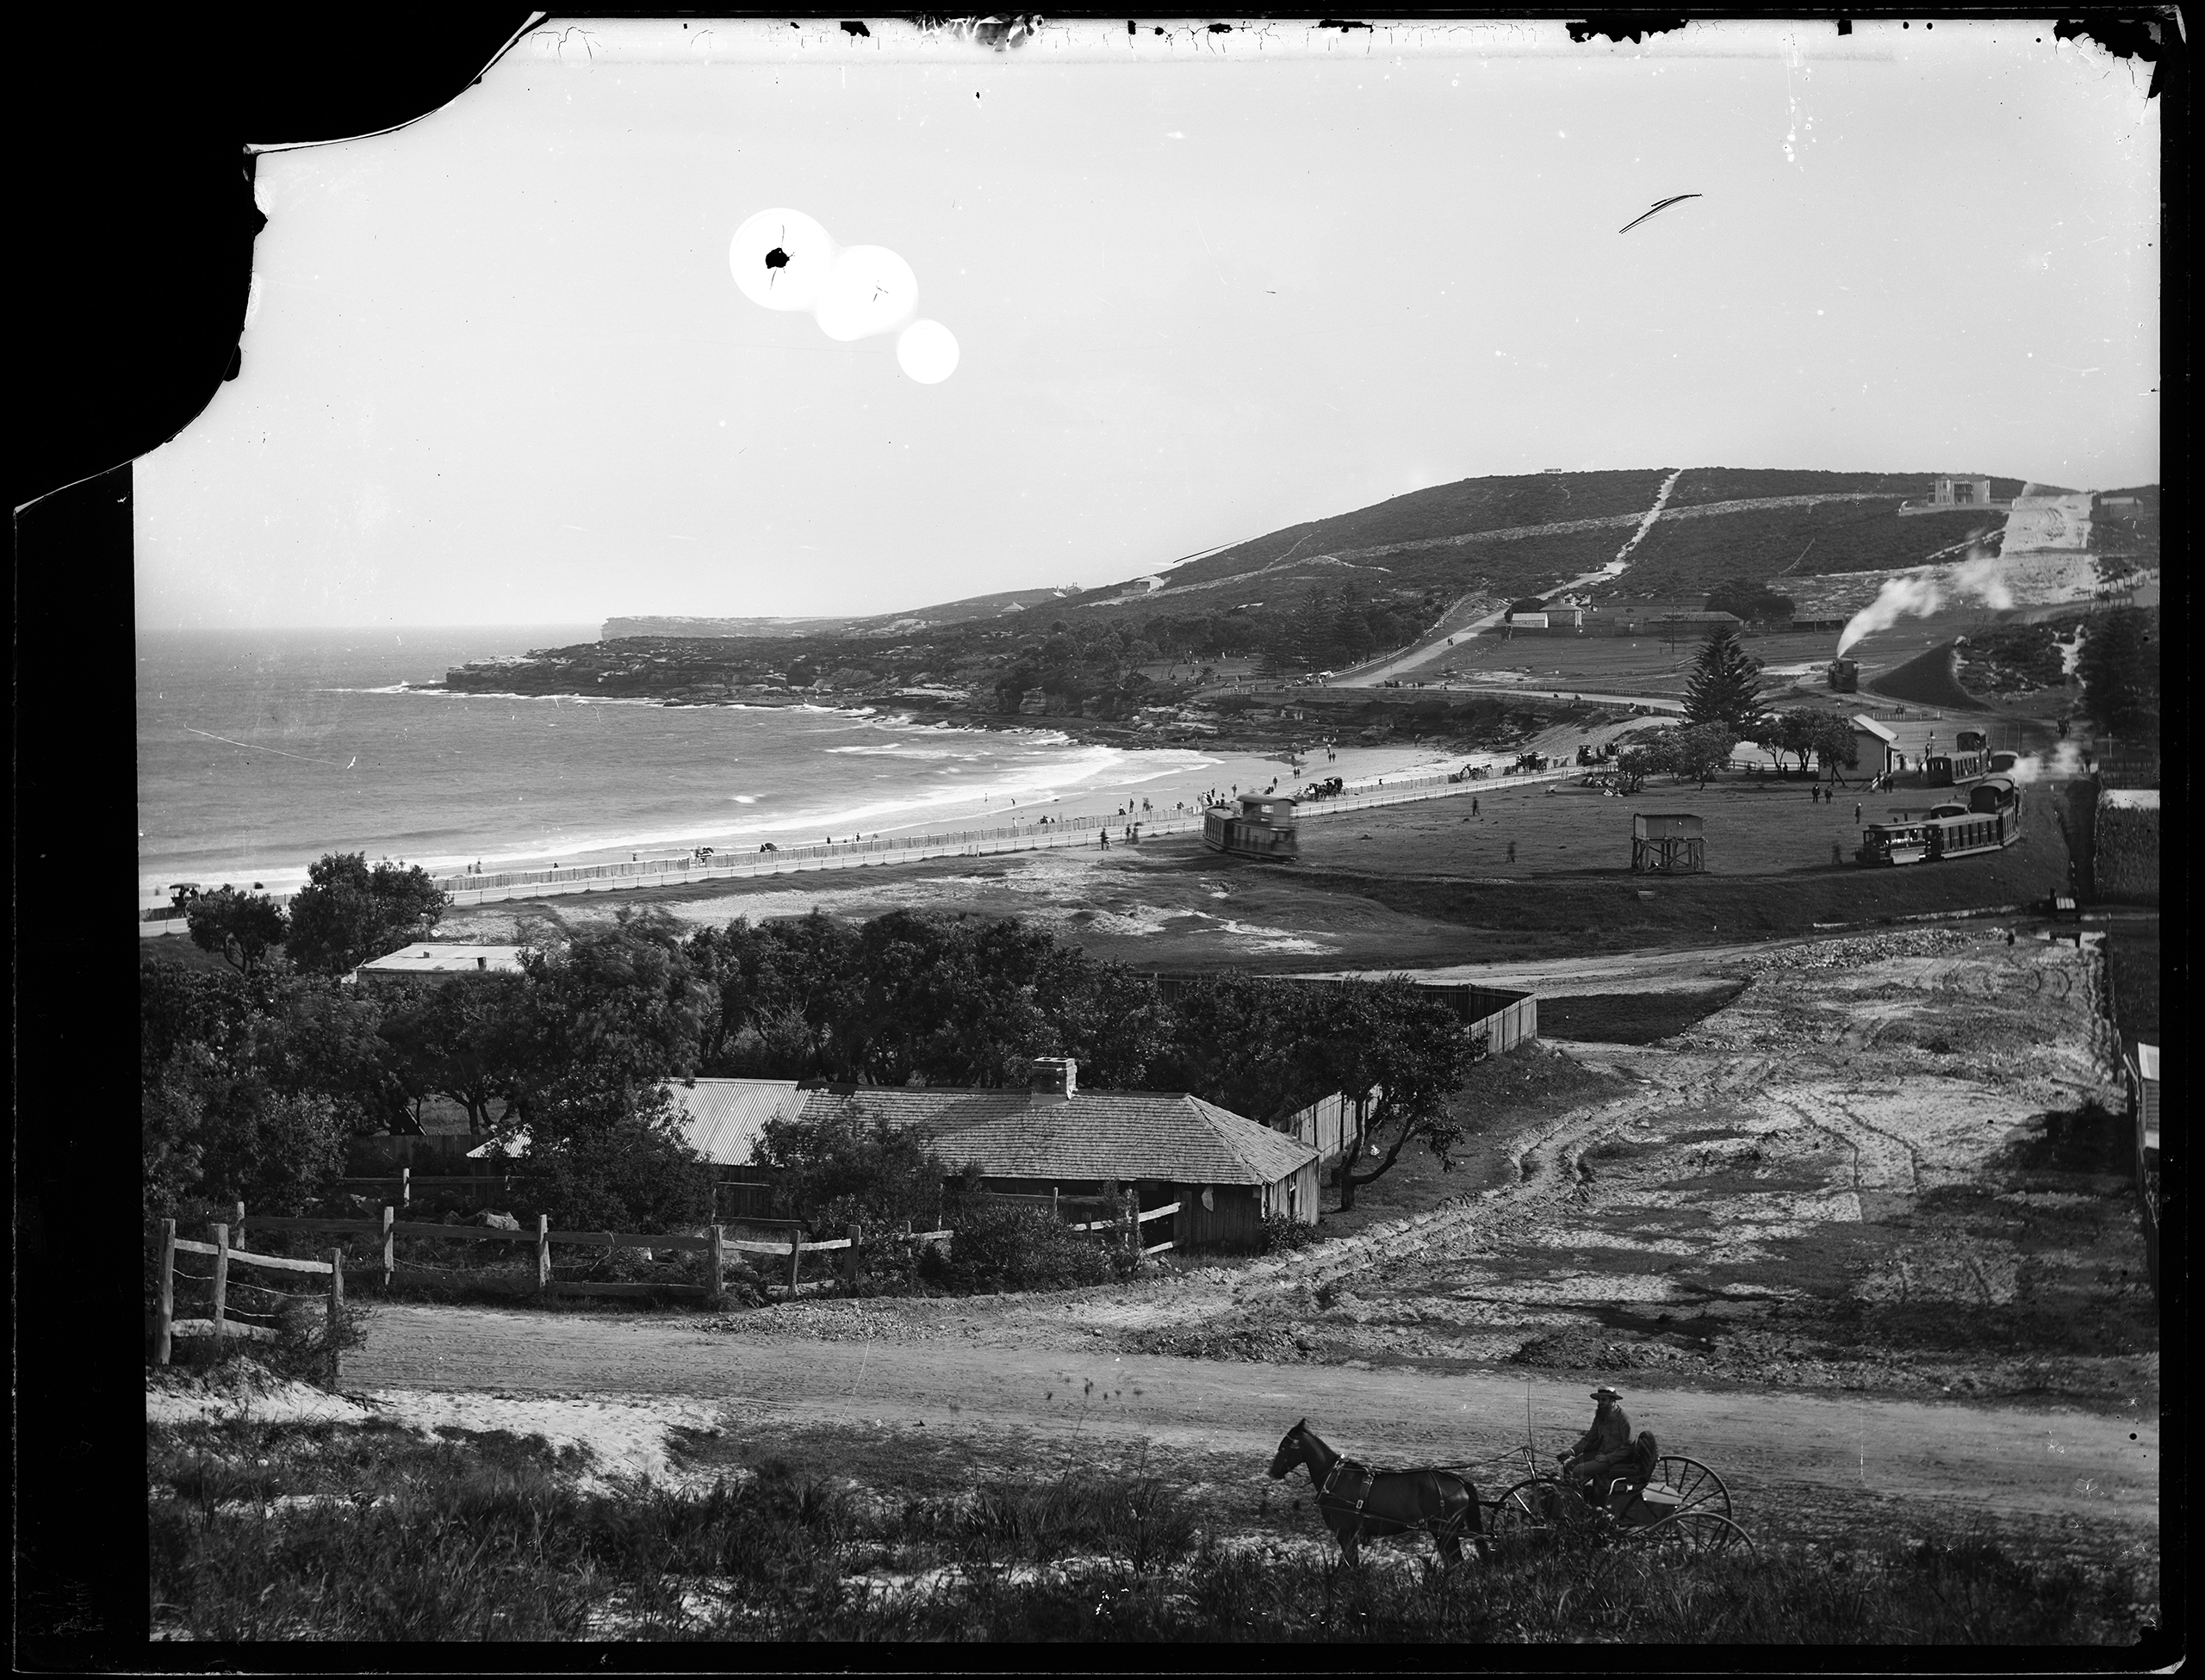 Glass plate negative of 'Coogee Bay' photographed by Henry King